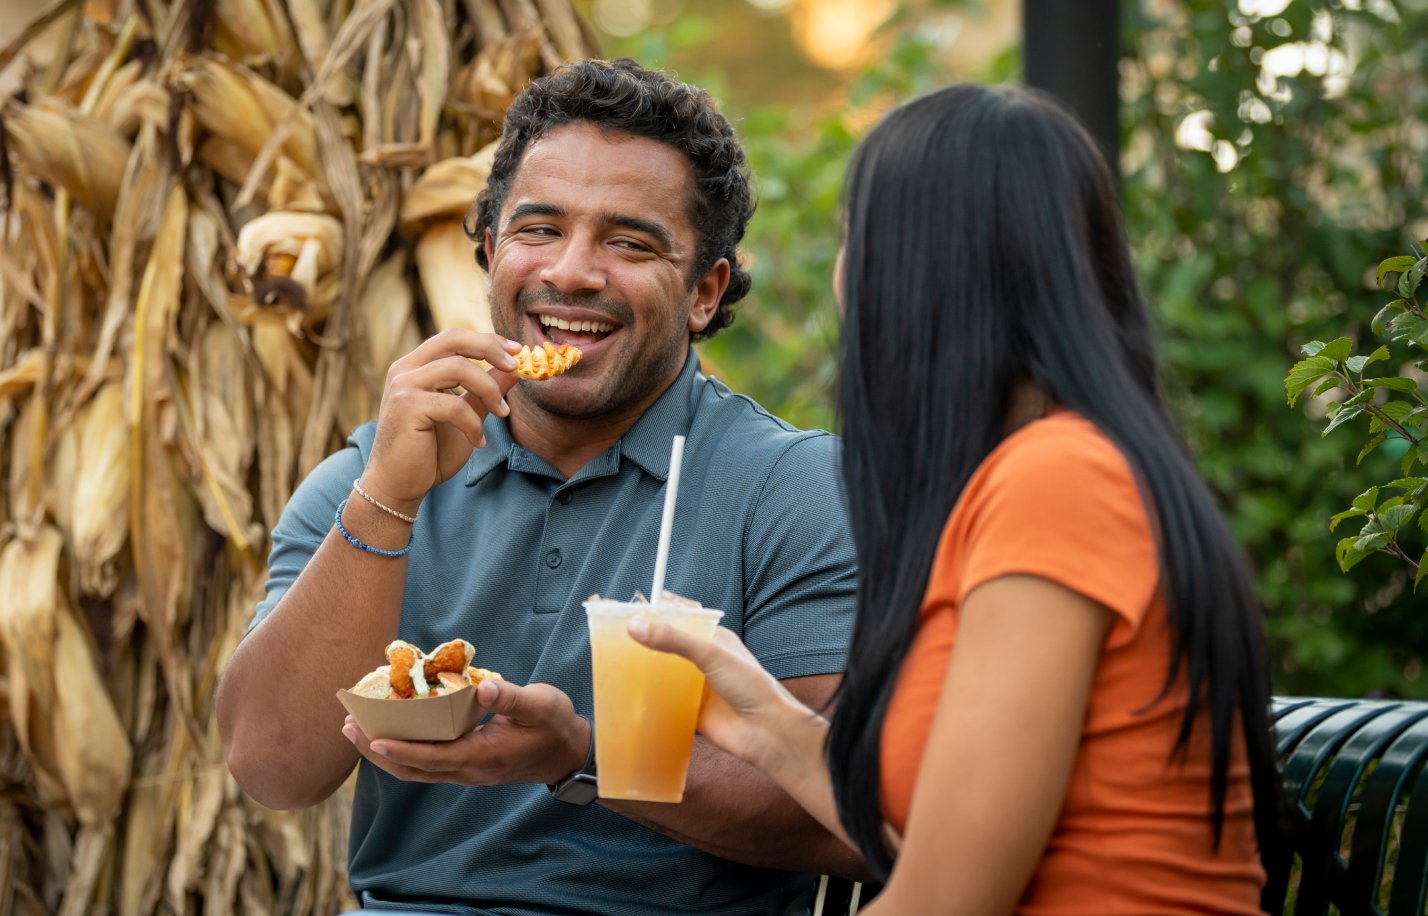 Two people enjoying the Everyone Eats Free Vacation package at Busch Gardens Williamsburg.